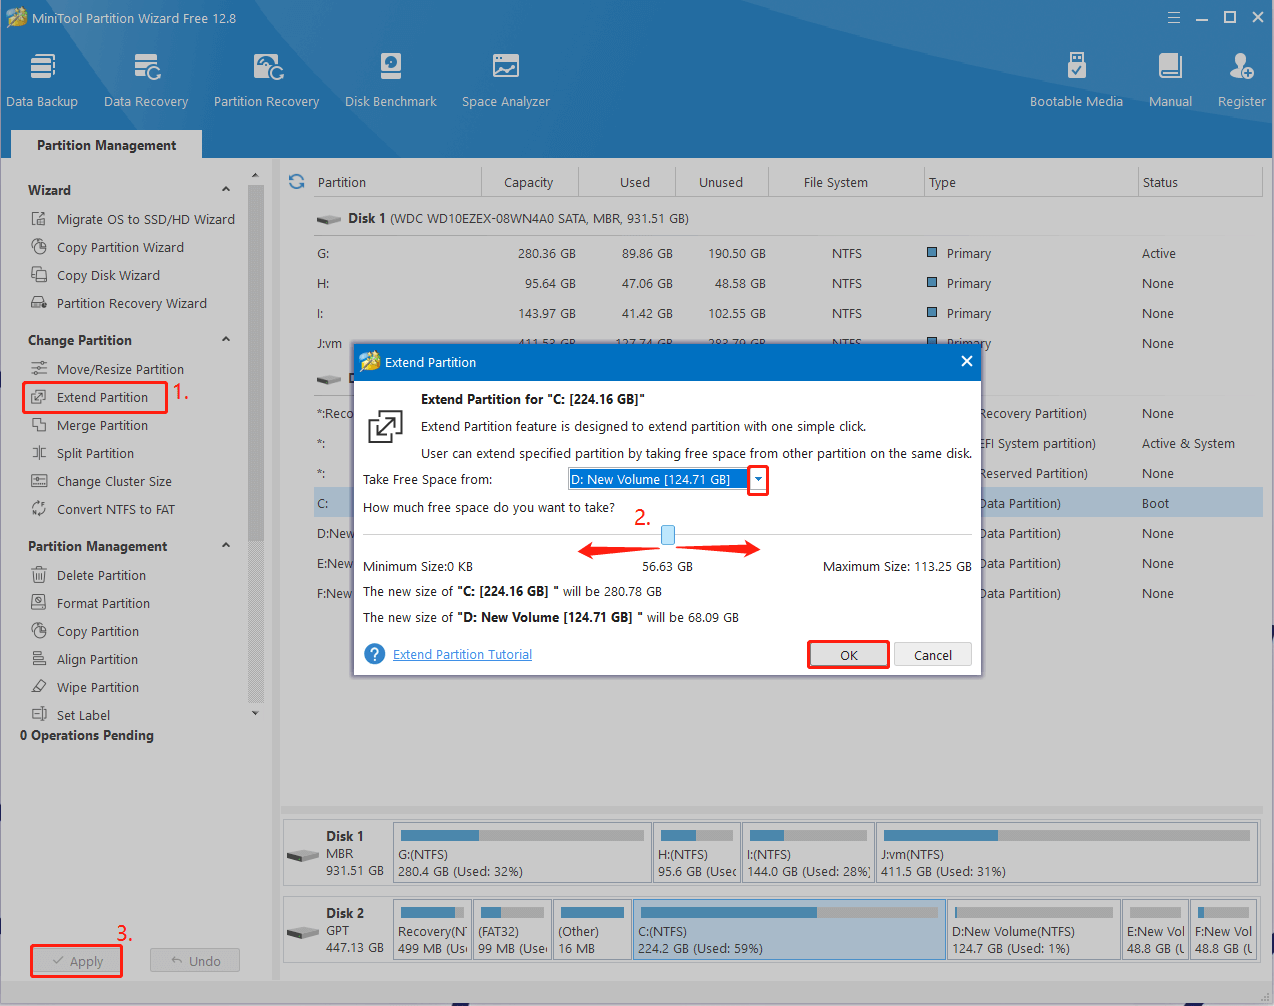 How to Fix Blitz App Not Working on Windows - MiniTool Partition